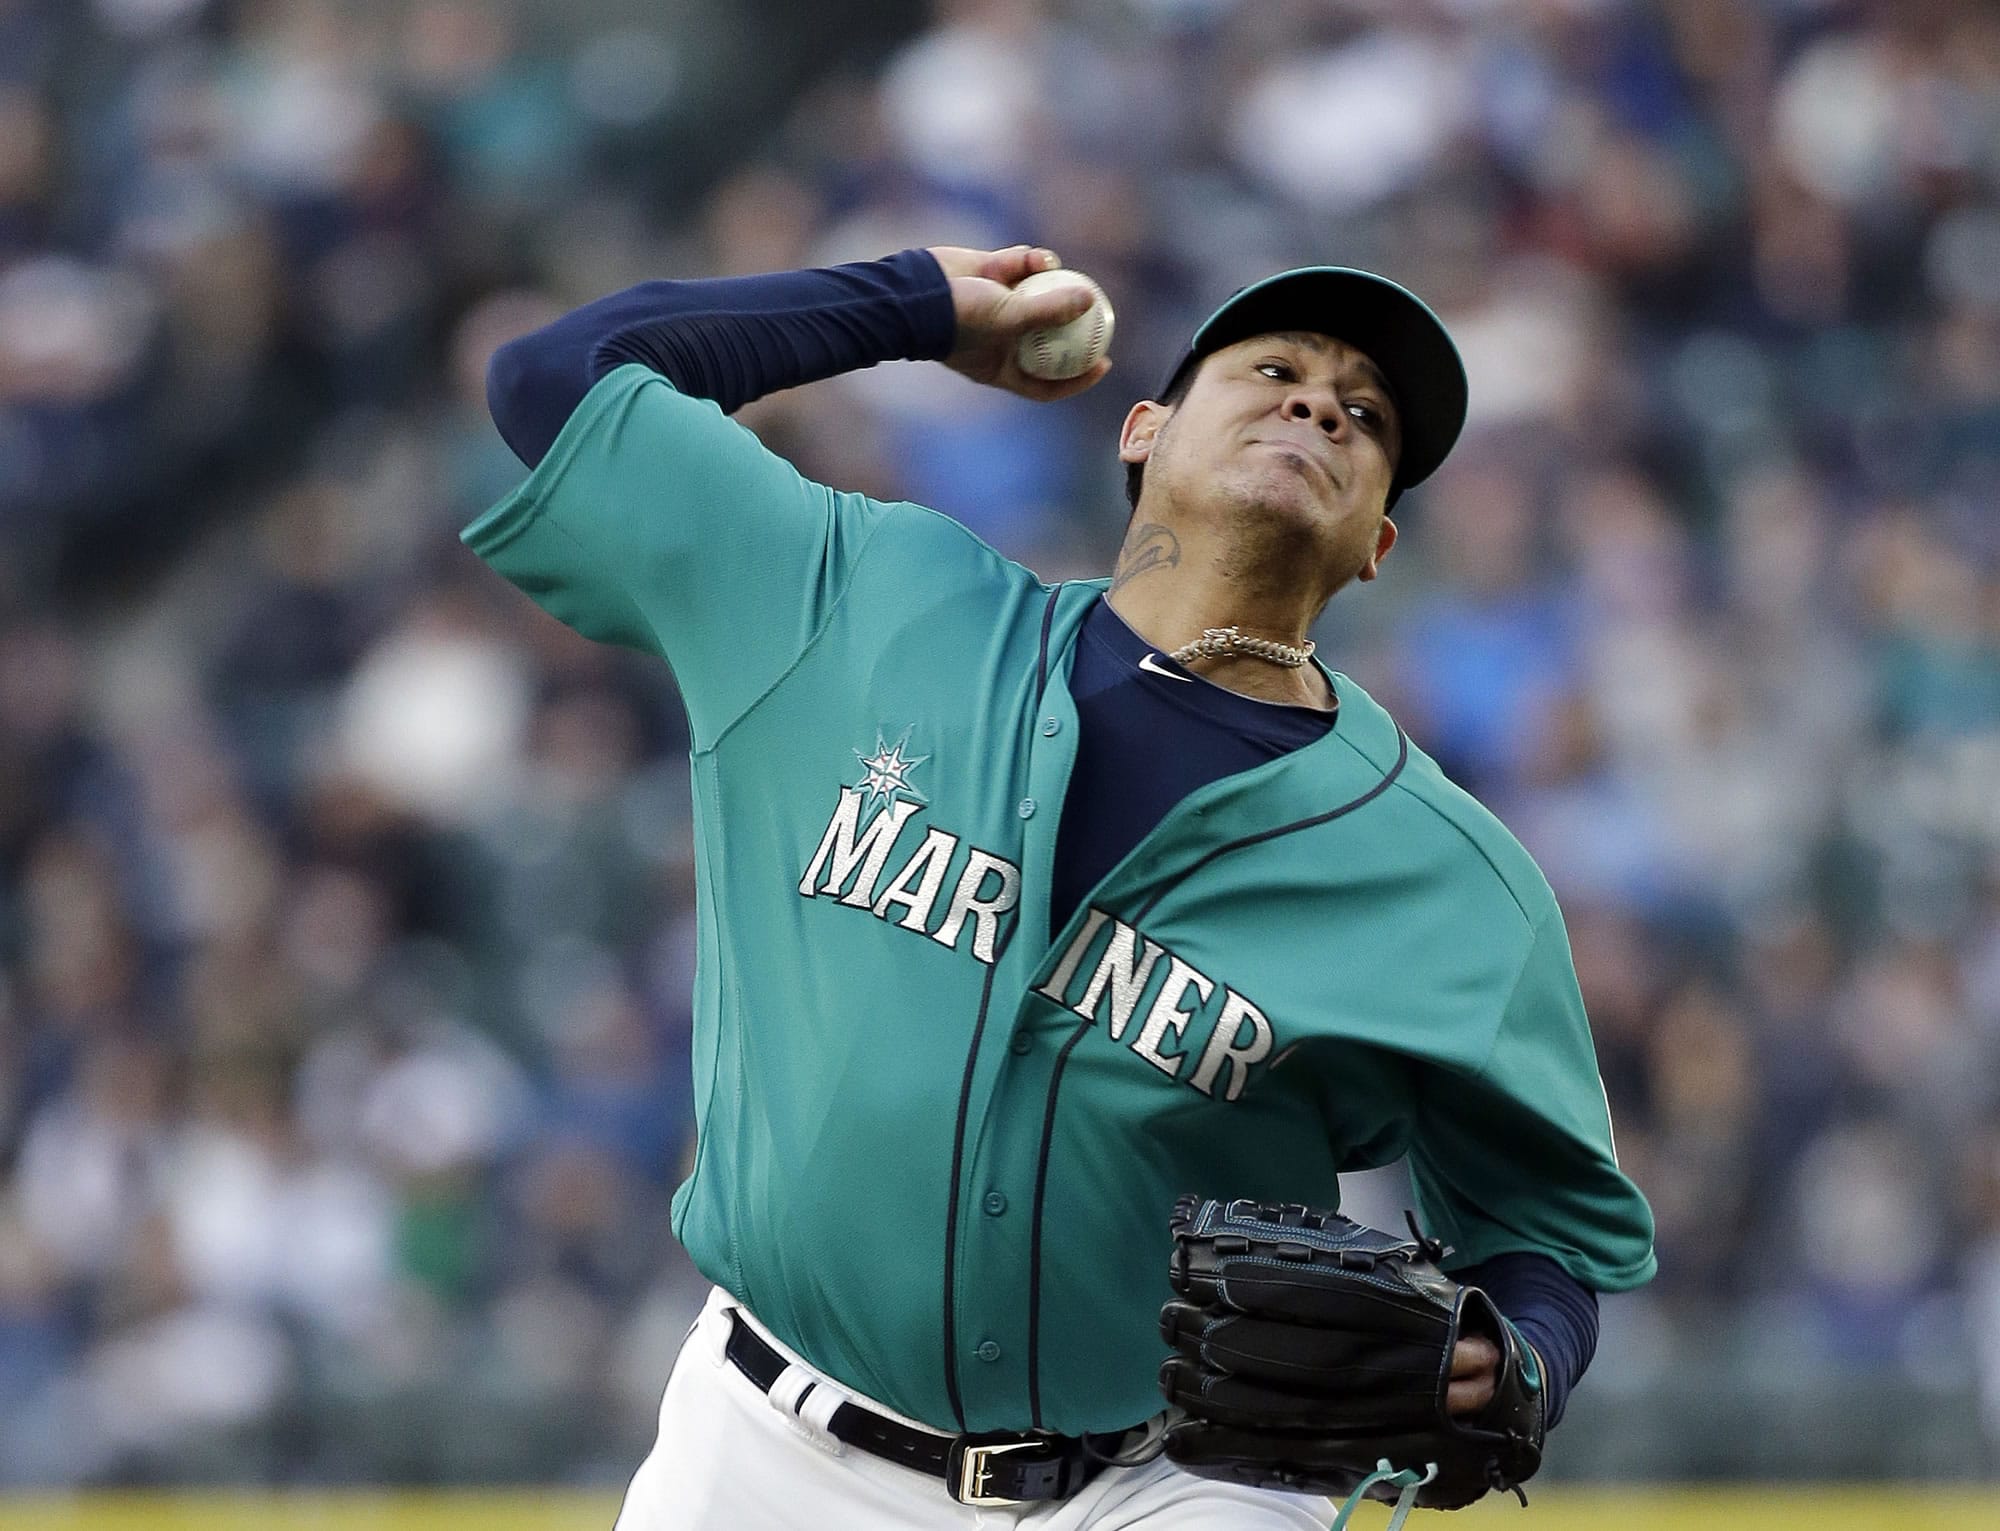 Seattle Mariners starting pitcher Felix Hernandez throws against the Texas Rangers during the first inning of a baseball game Friday, April 14, 2017, in Seattle.